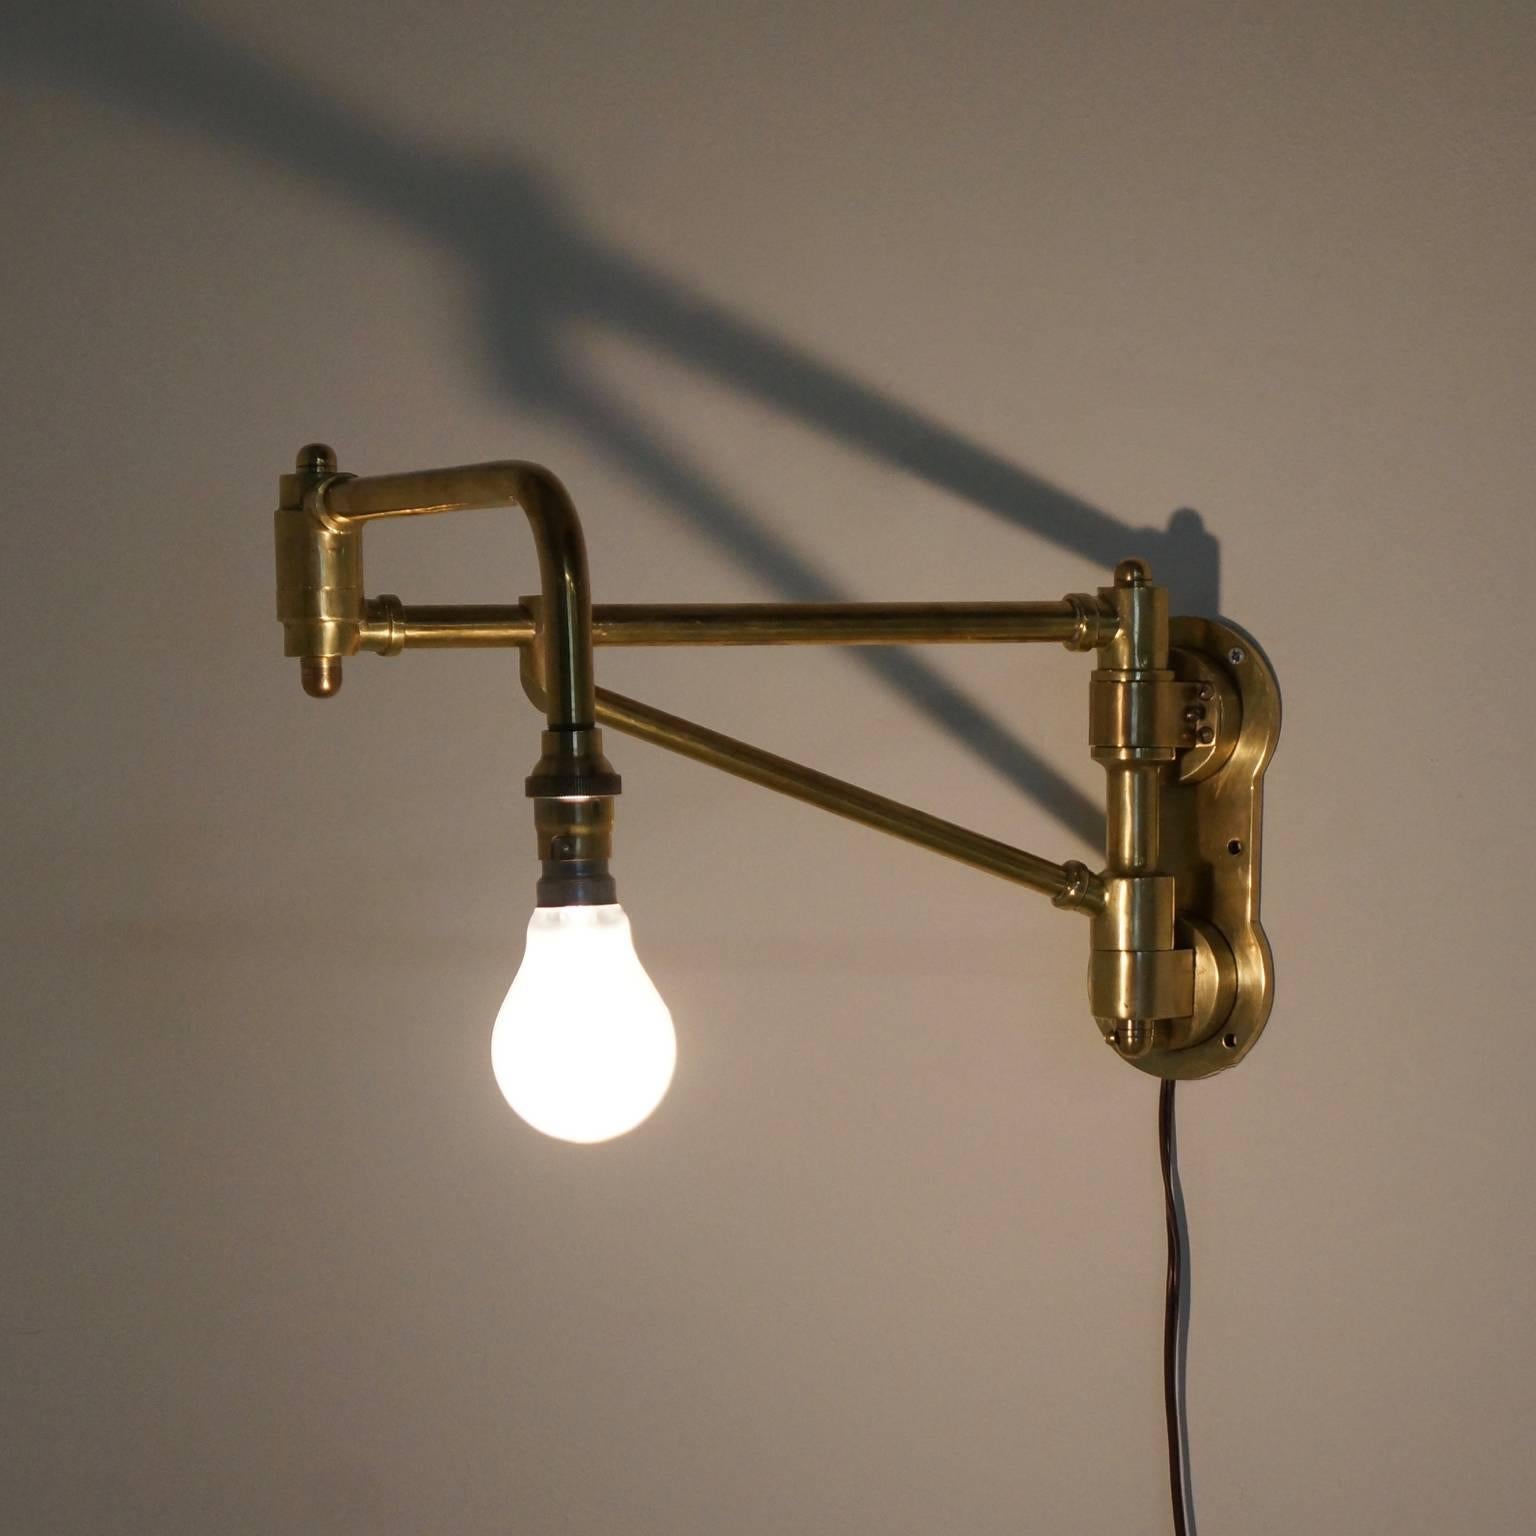 Industrial brass machine workbench lamp from France, circa 1930. Beautiful in its simplicity with visible socket and bulb with bayonet fitting. This rare wall lamp is made of brass and has lots of nice little touches (see photos). The lamp is